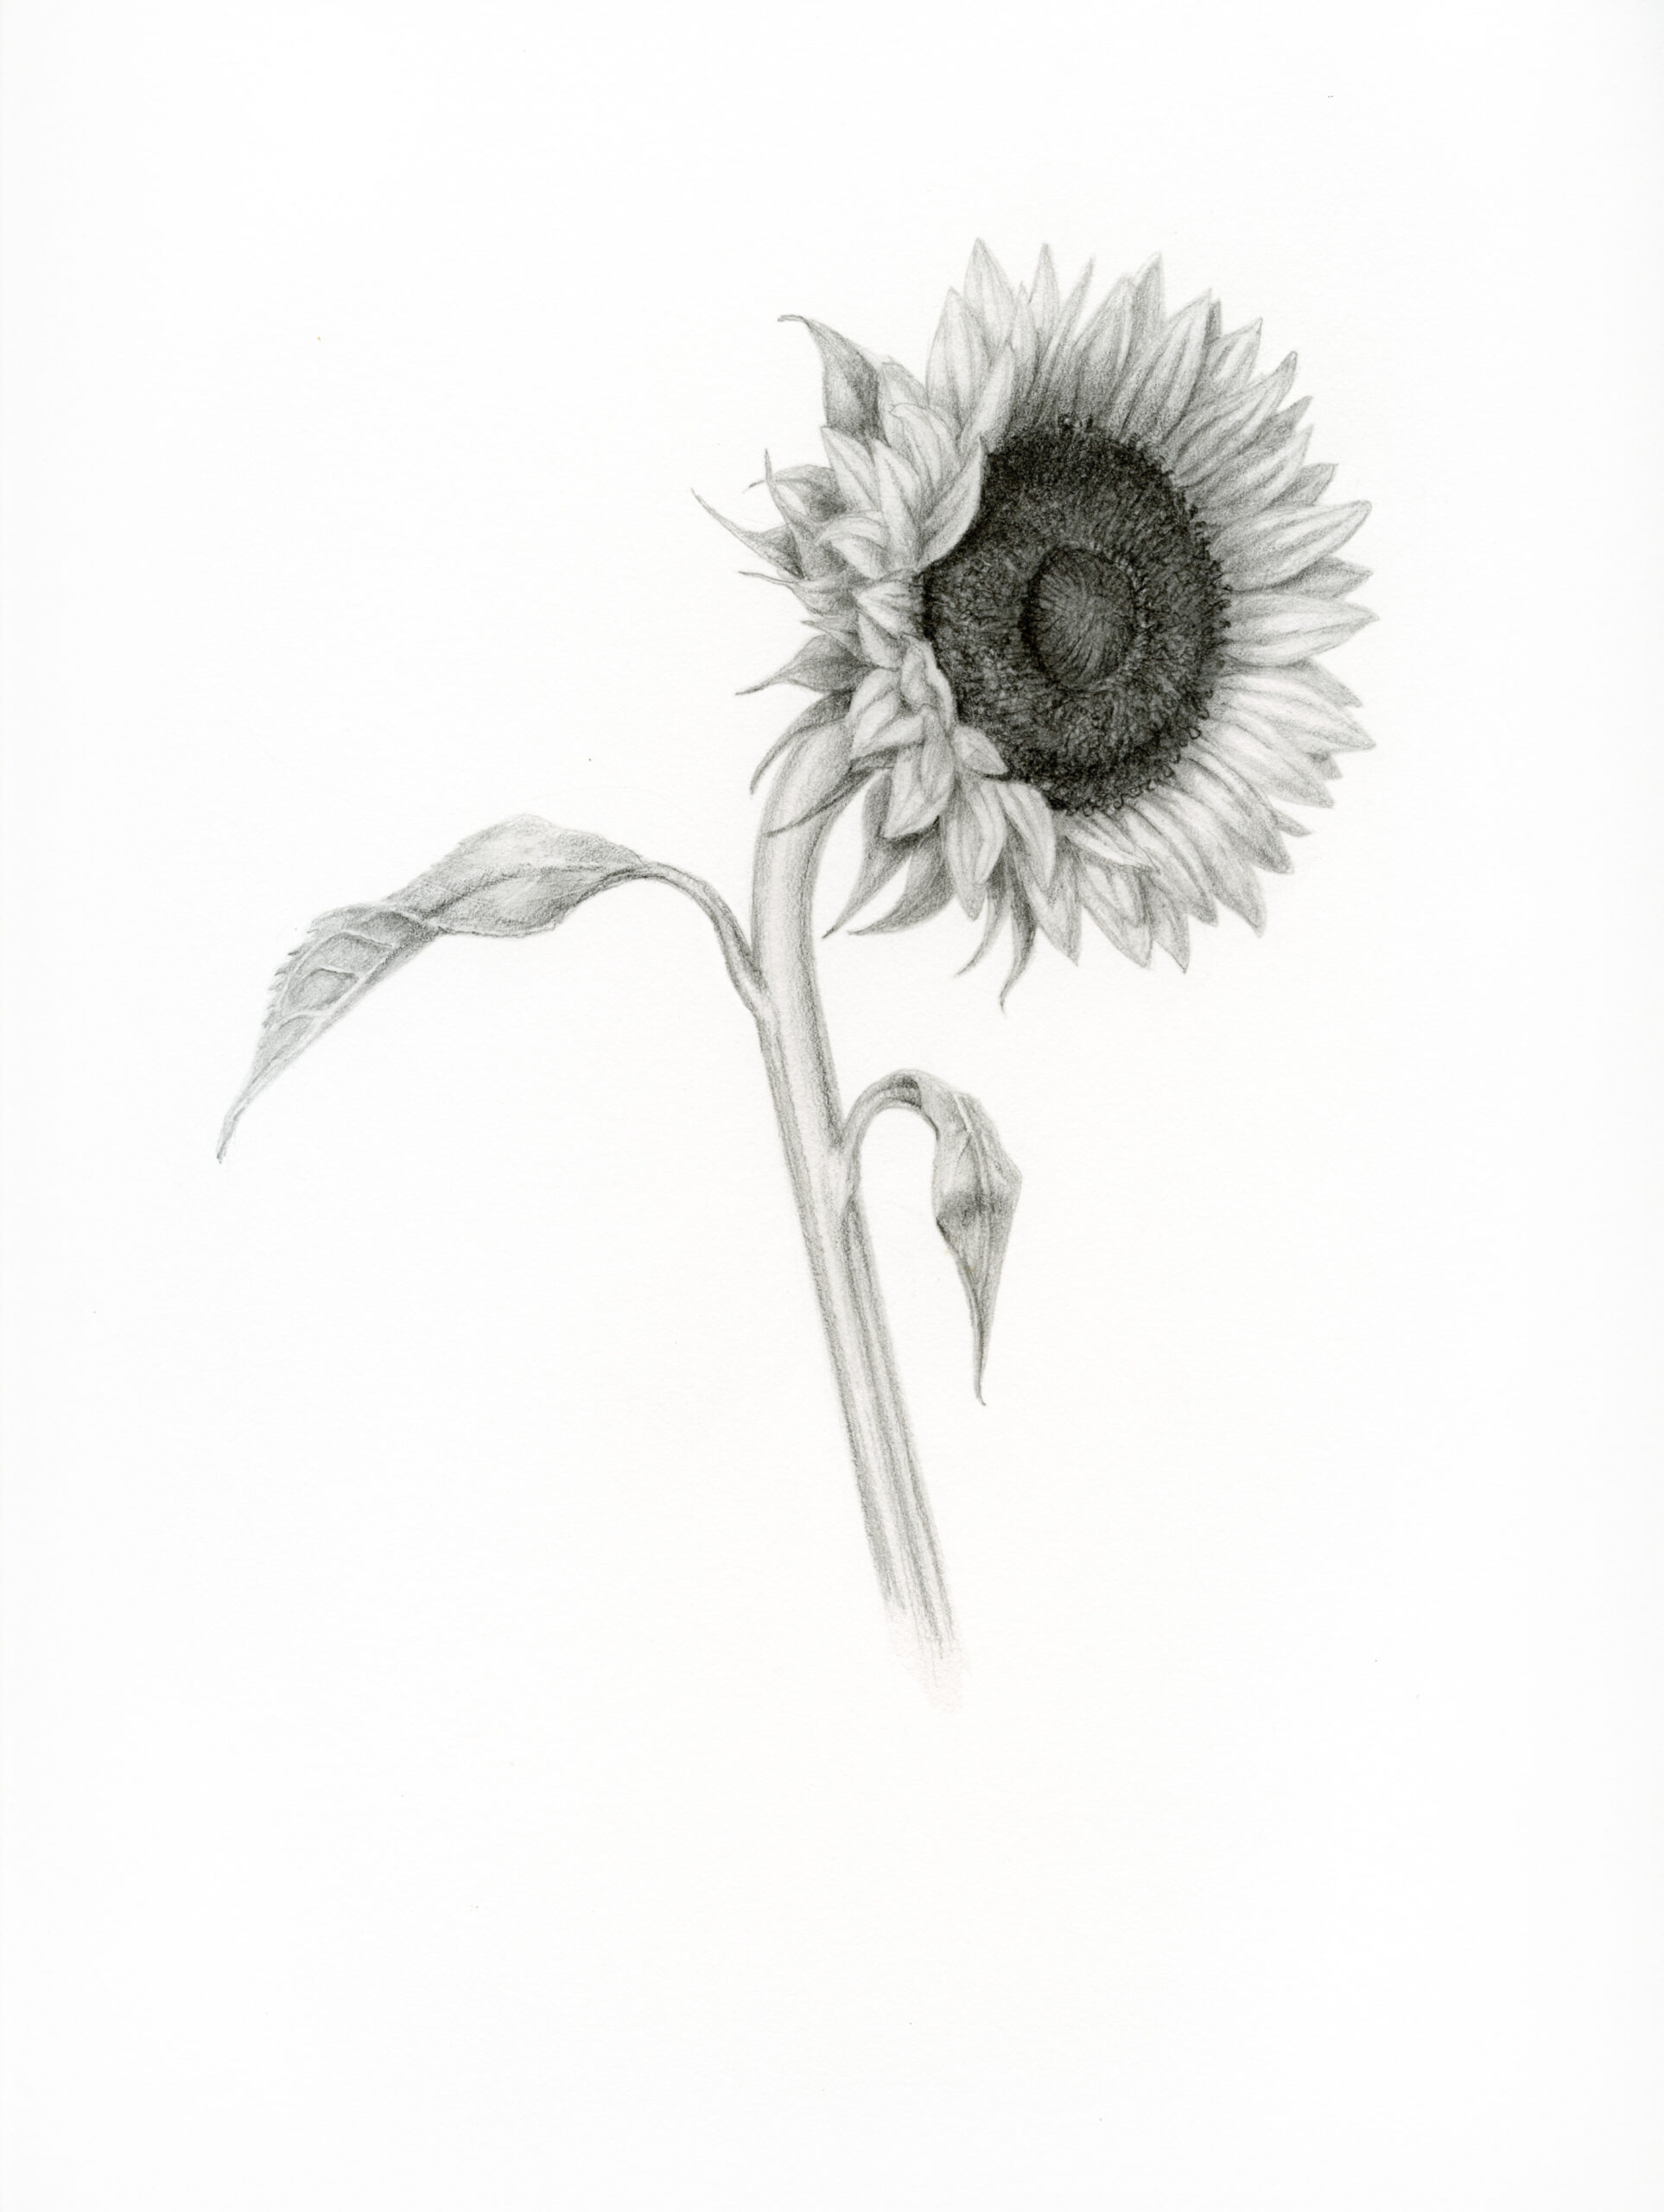 sunflower by Katy Lyness